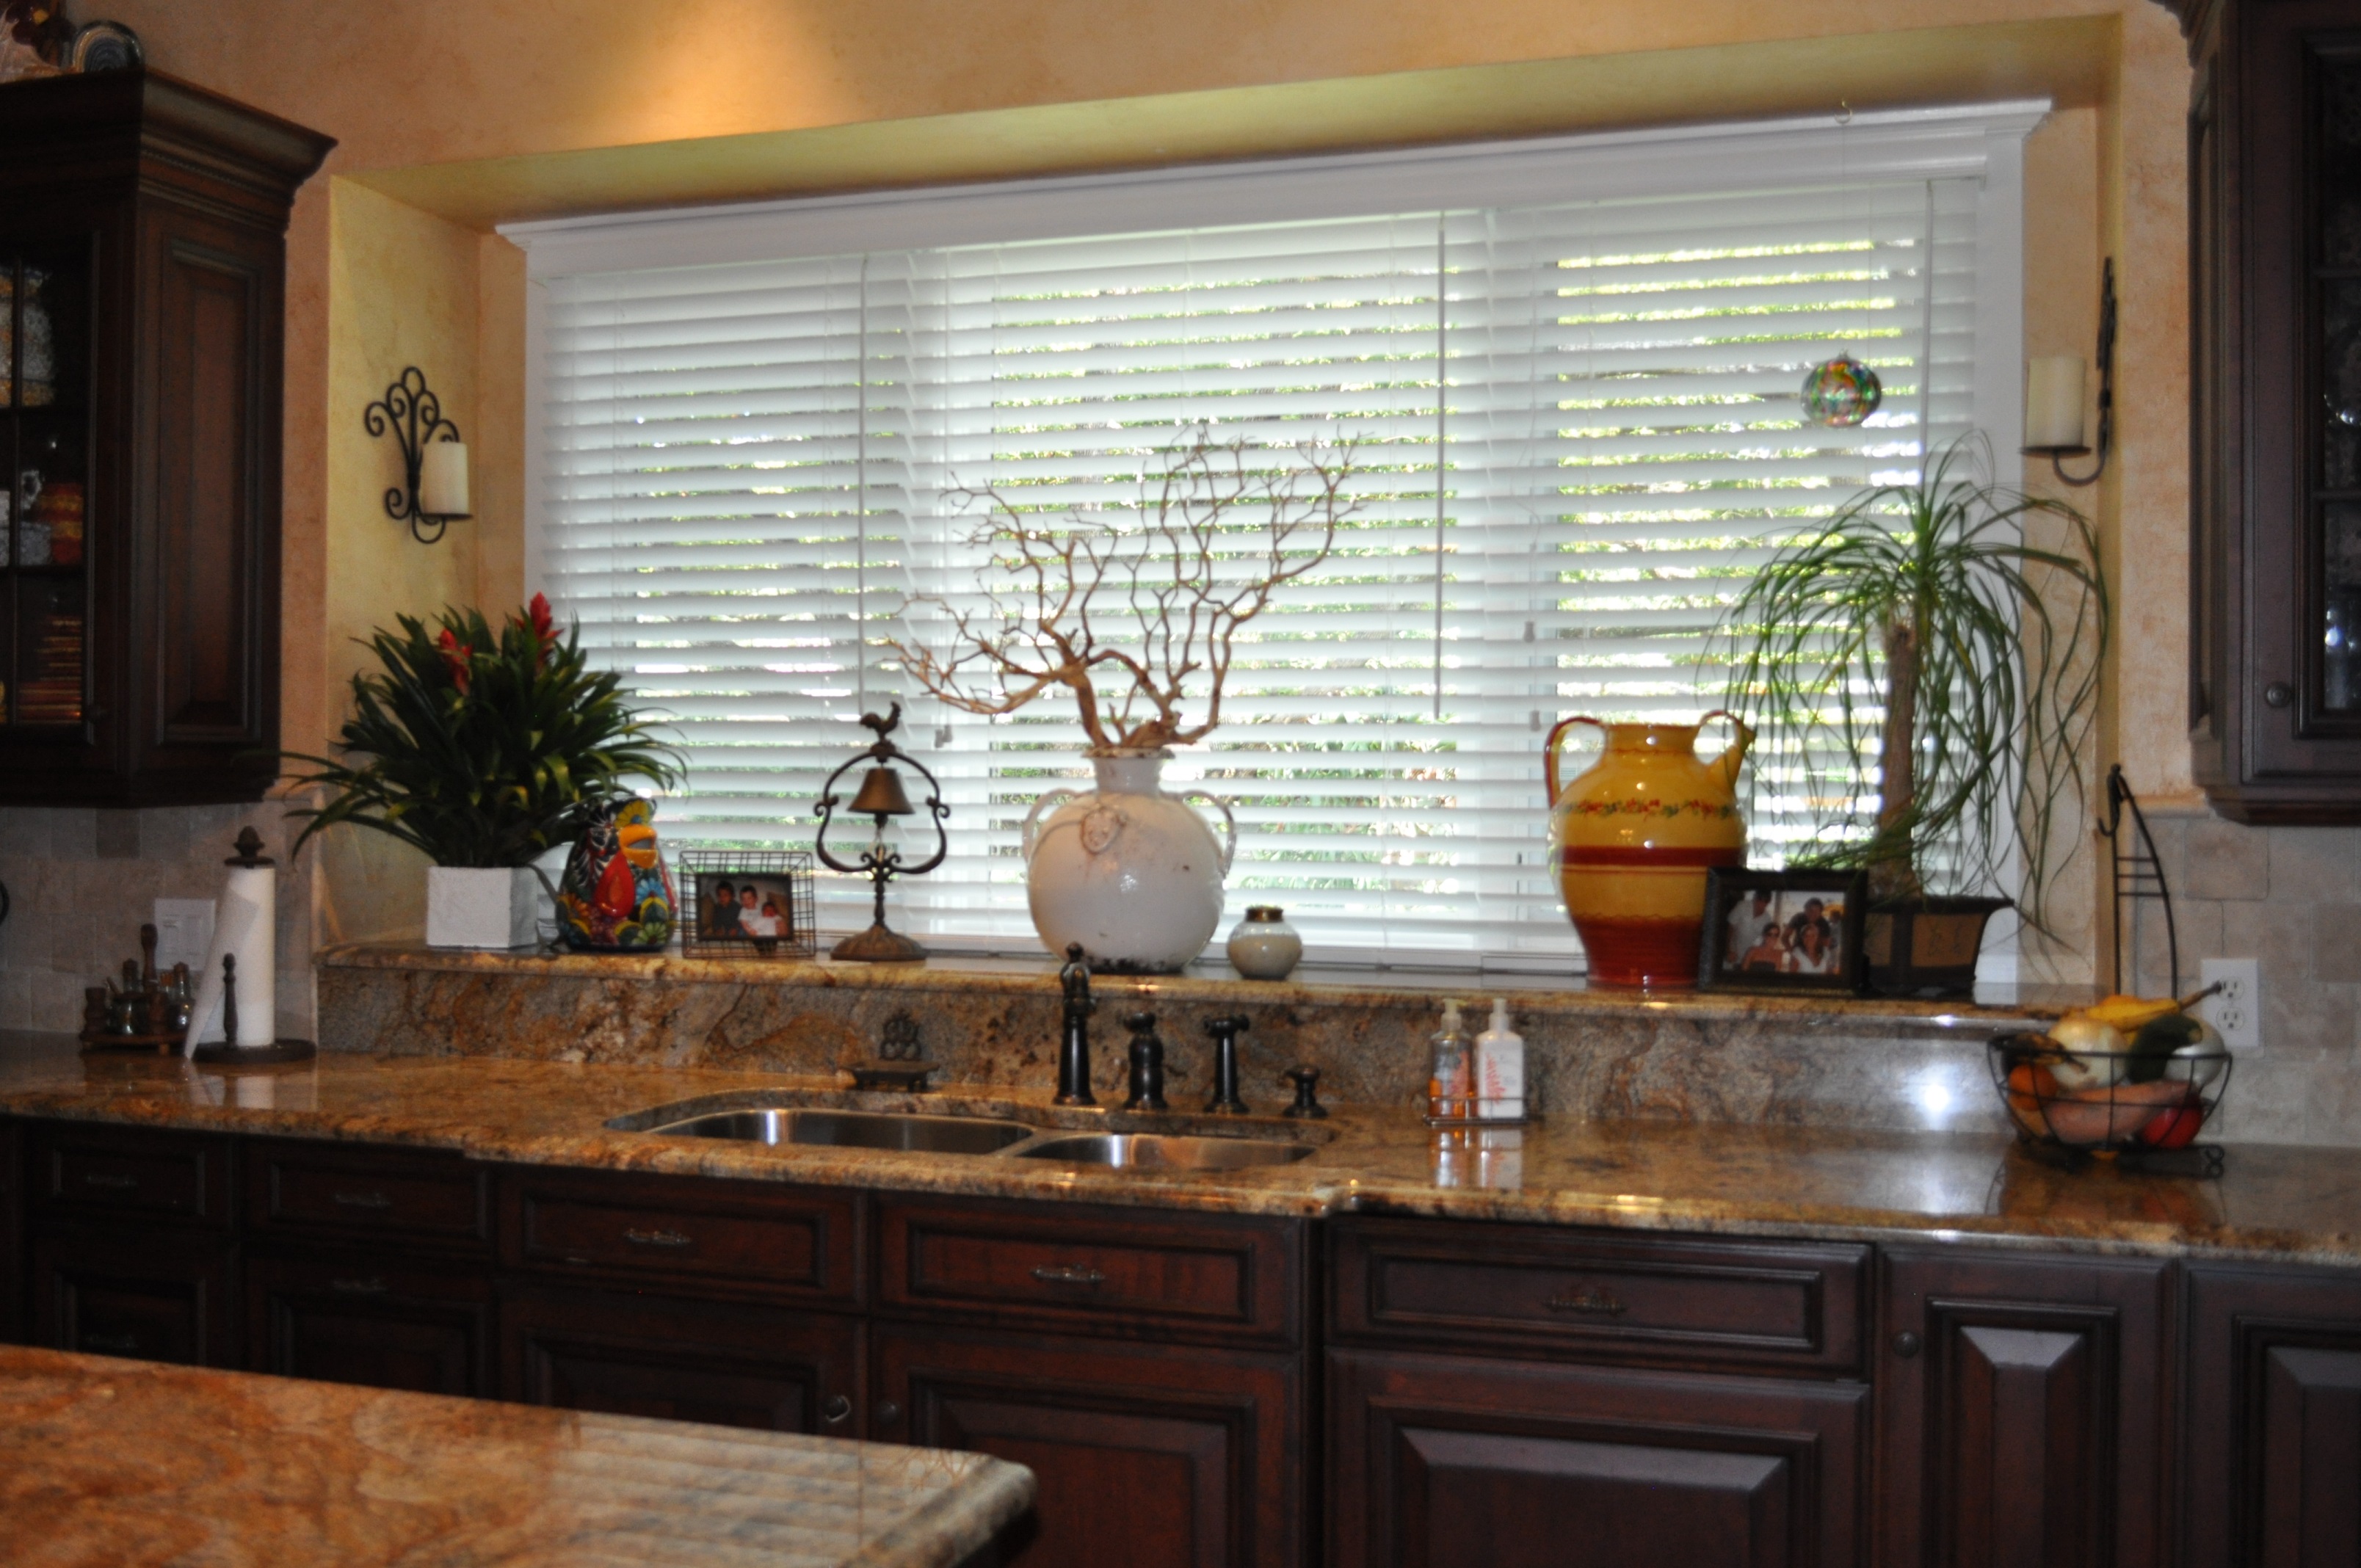 plantation shutters Lady Lake, window blinds, roller shades